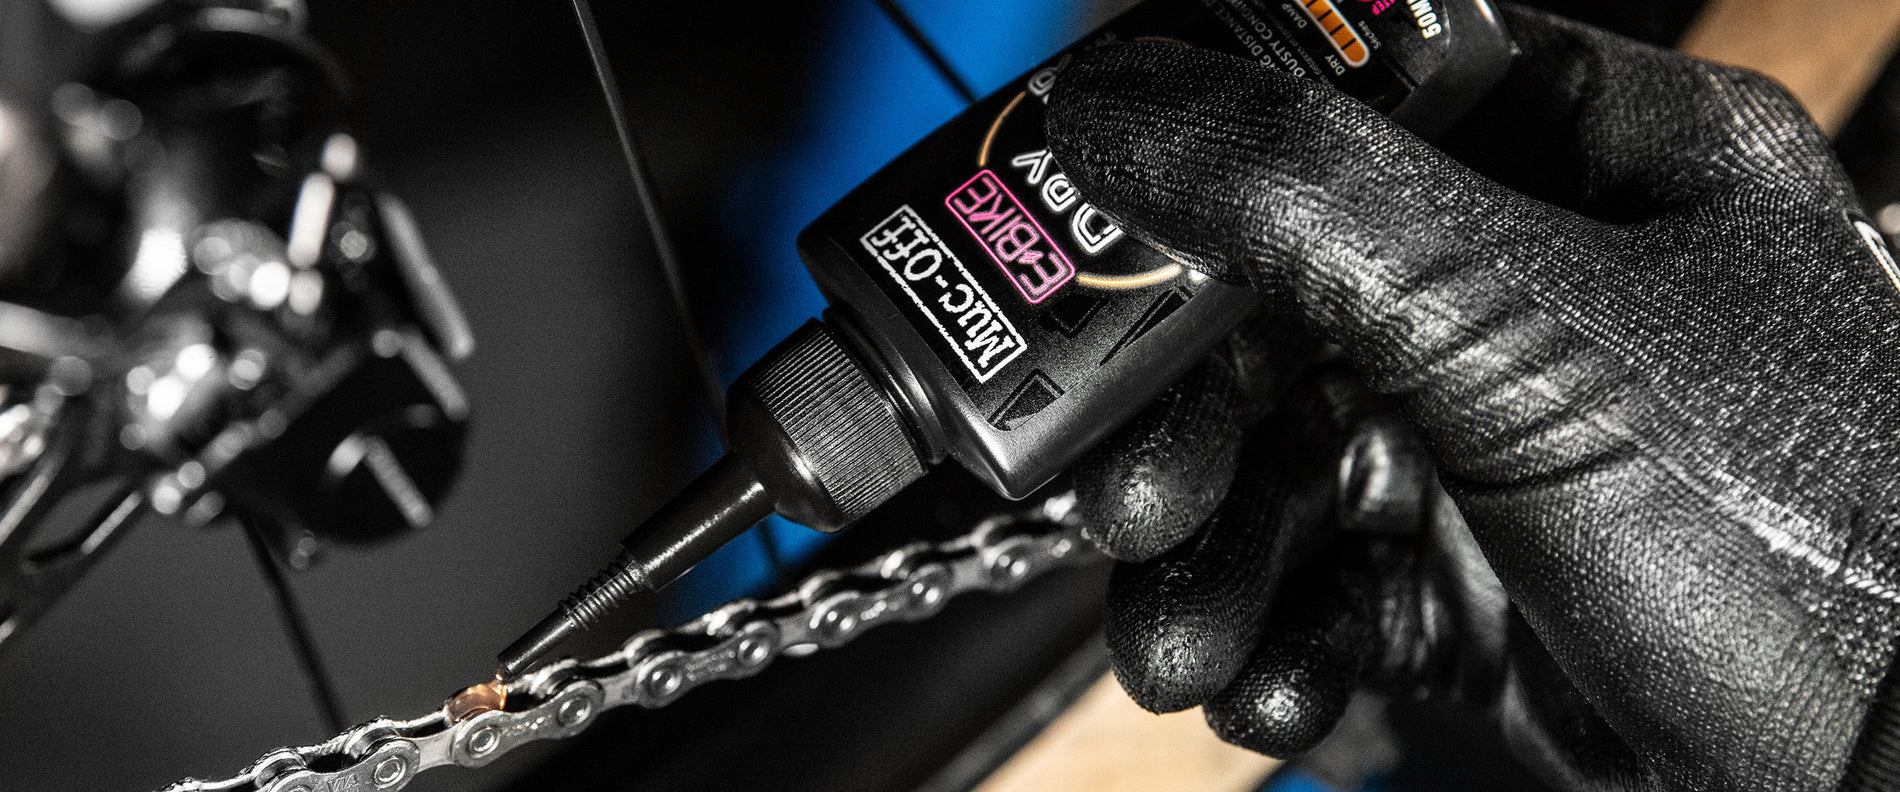  Muc-Off Dry Chain Lube, 50 Milliliters - Biodegradable Bike  Chain Lubricant, Suitable For All Types Of Bike - Formulated For Dry  Weather Conditions : Bike Oils : Sports & Outdoors